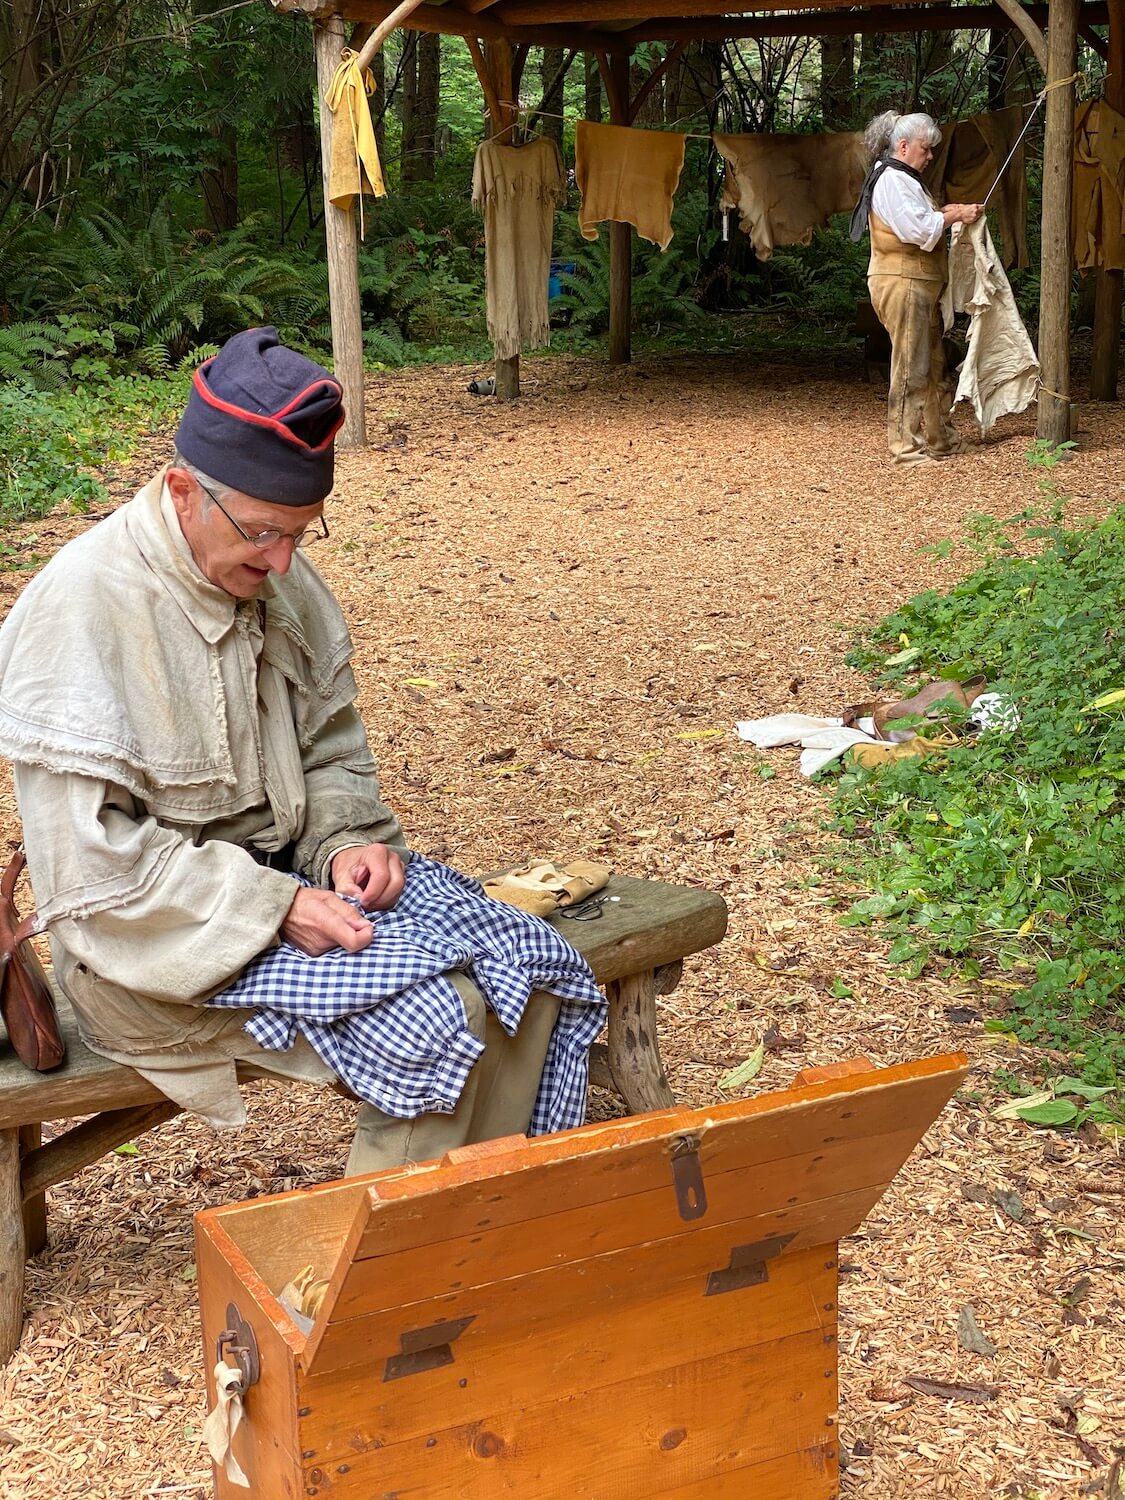 A man wearing clothing common around 1805 when the Lewis and Clark expedition arrived at Fort Clatsop, sews clothing in preparation for Winter.  This interpretive scene is part of the exhibit at the Lewis and Clark National Historic Area.